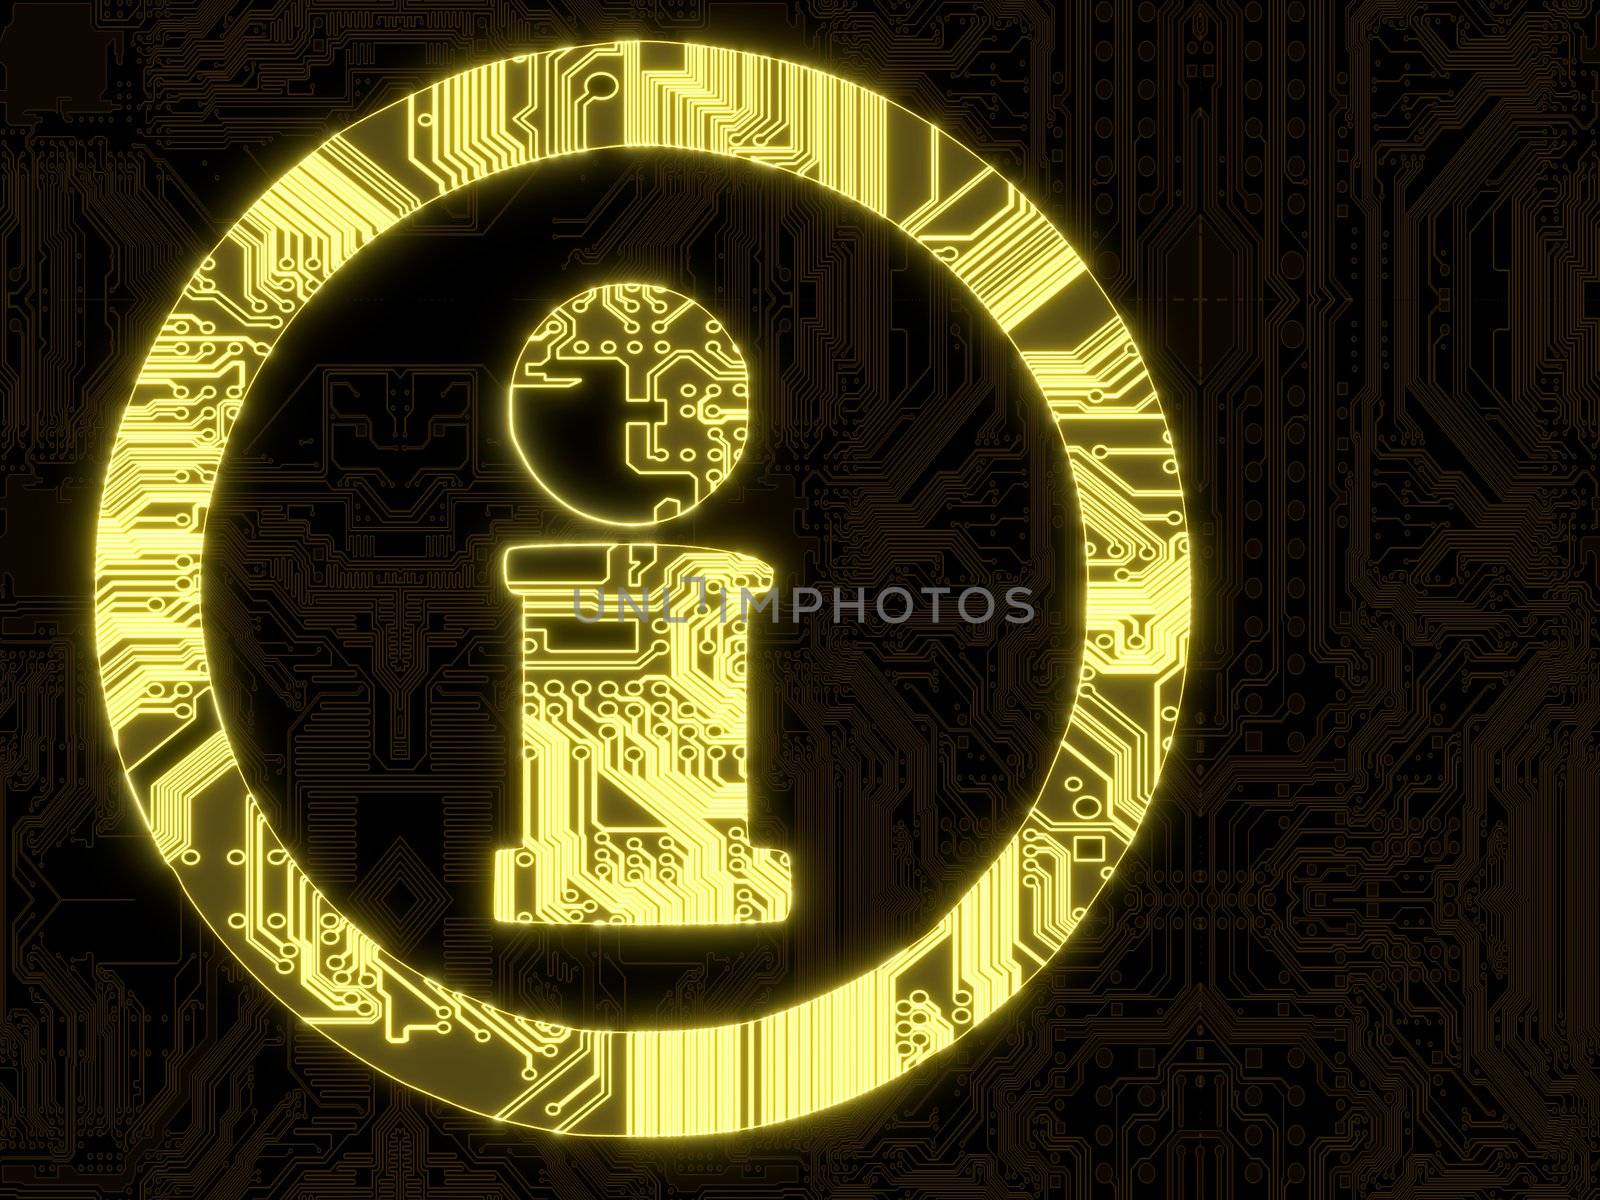  3D Graphic flare glowing information symbol in a dark background on a computer chip